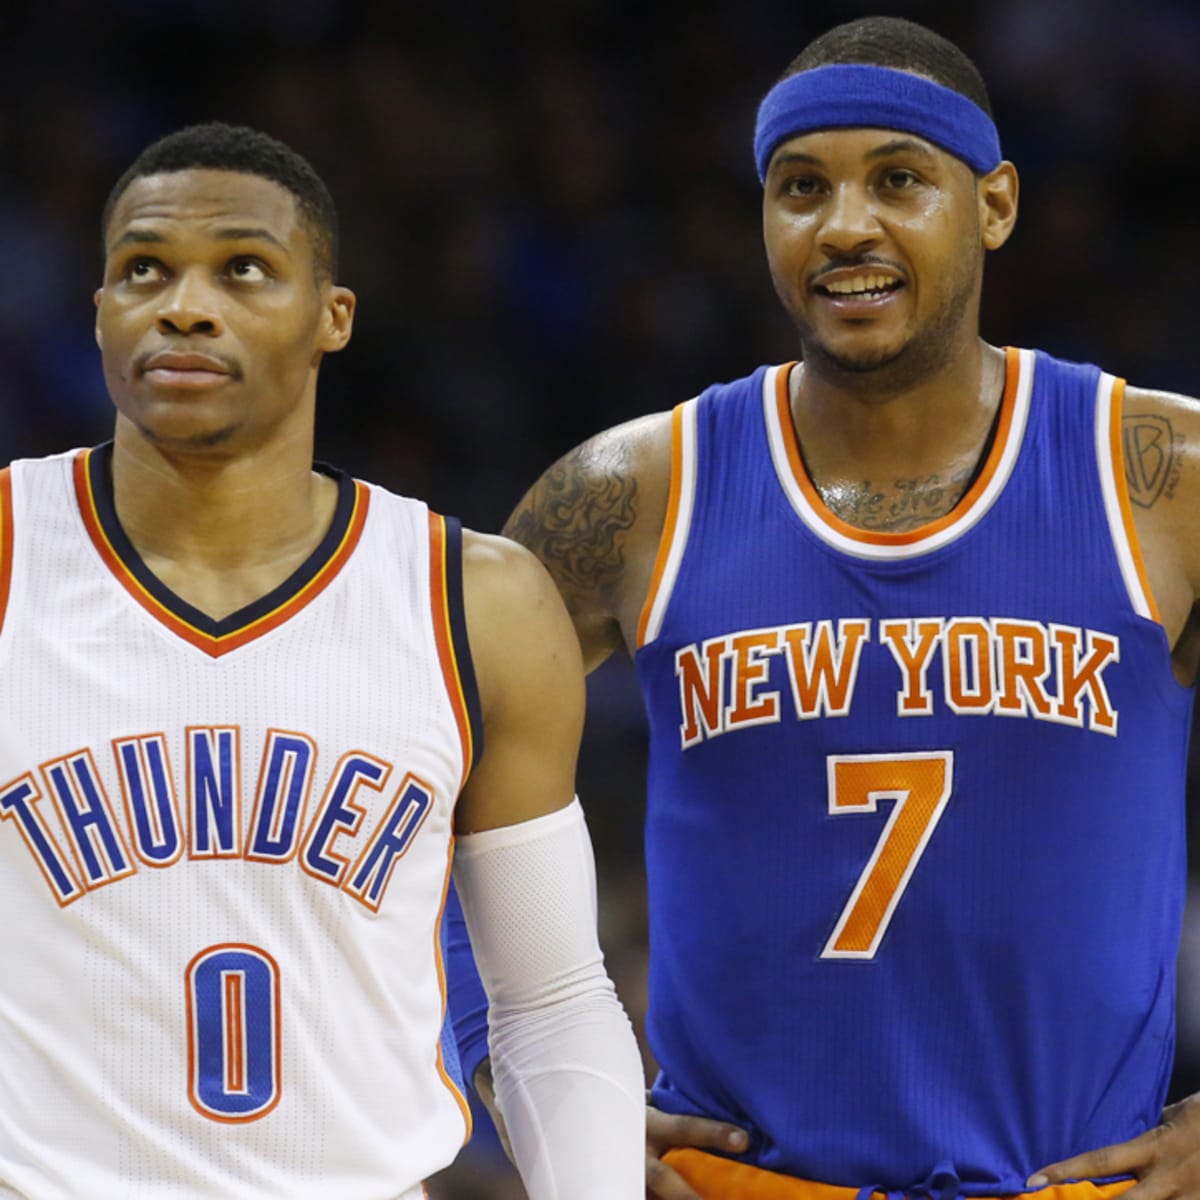 Russell Westbrook, Paul George Bond in OKC - Sports Illustrated